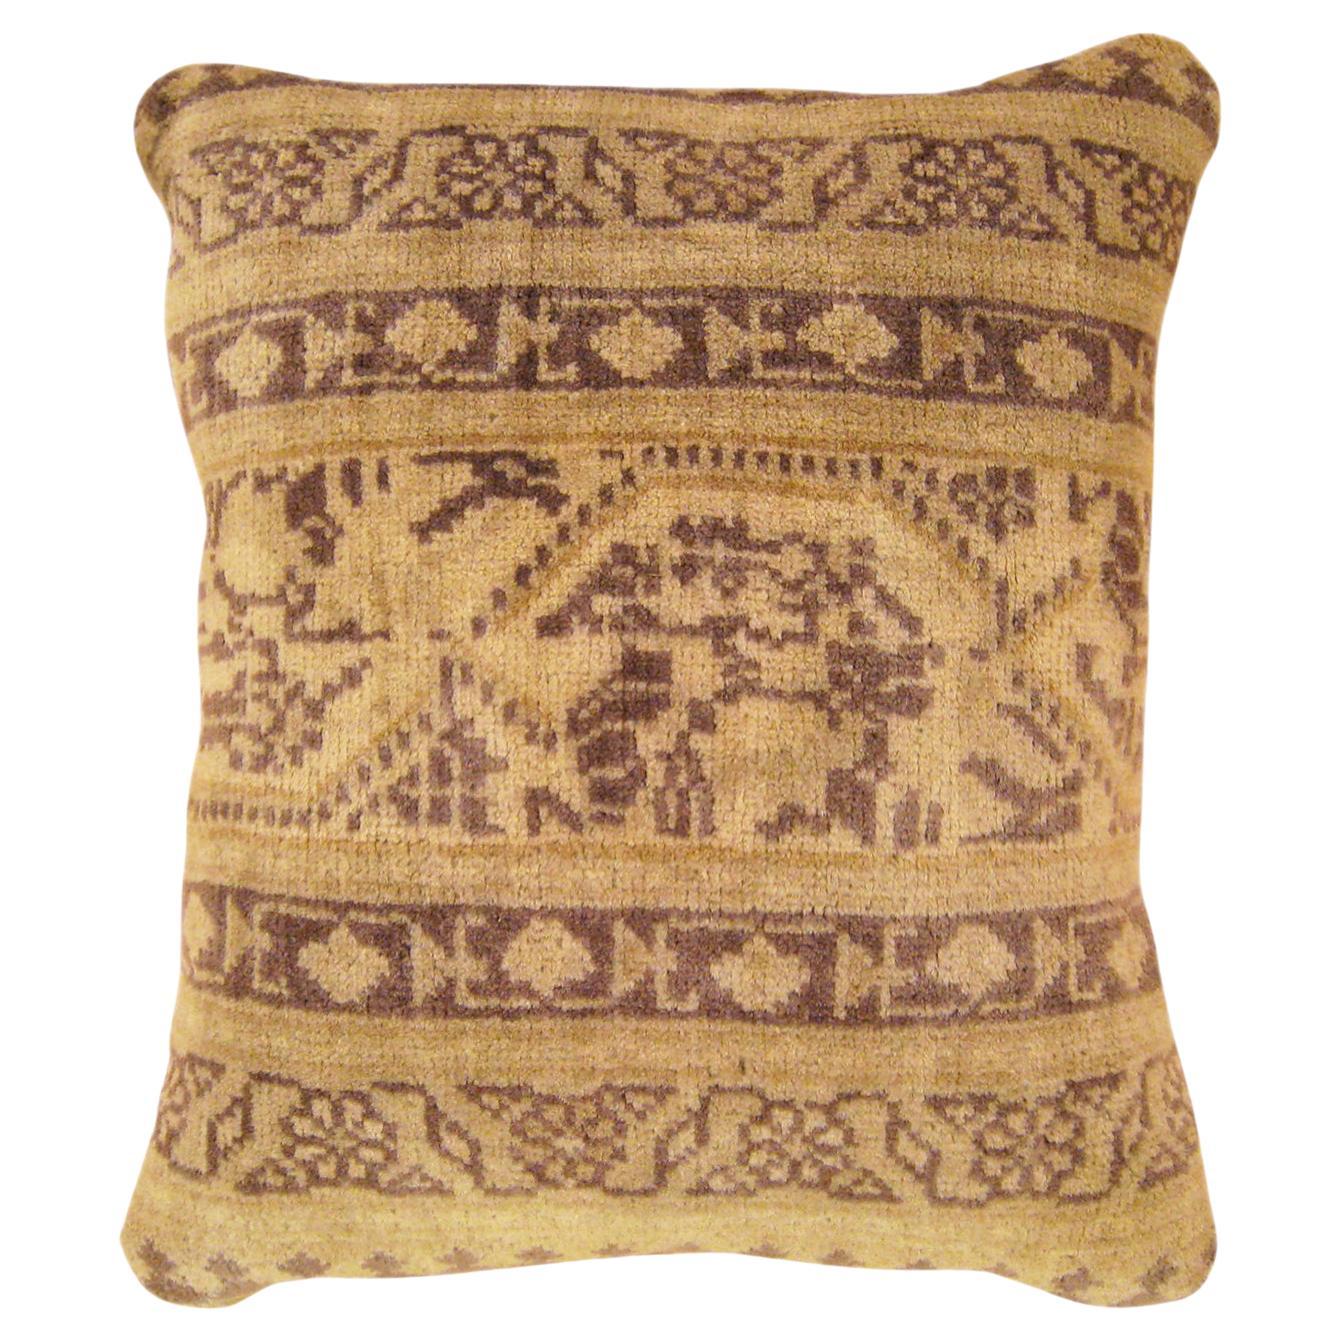 Decorative Antique Indian Agra Carpet Pillow with Geometric Abstracts